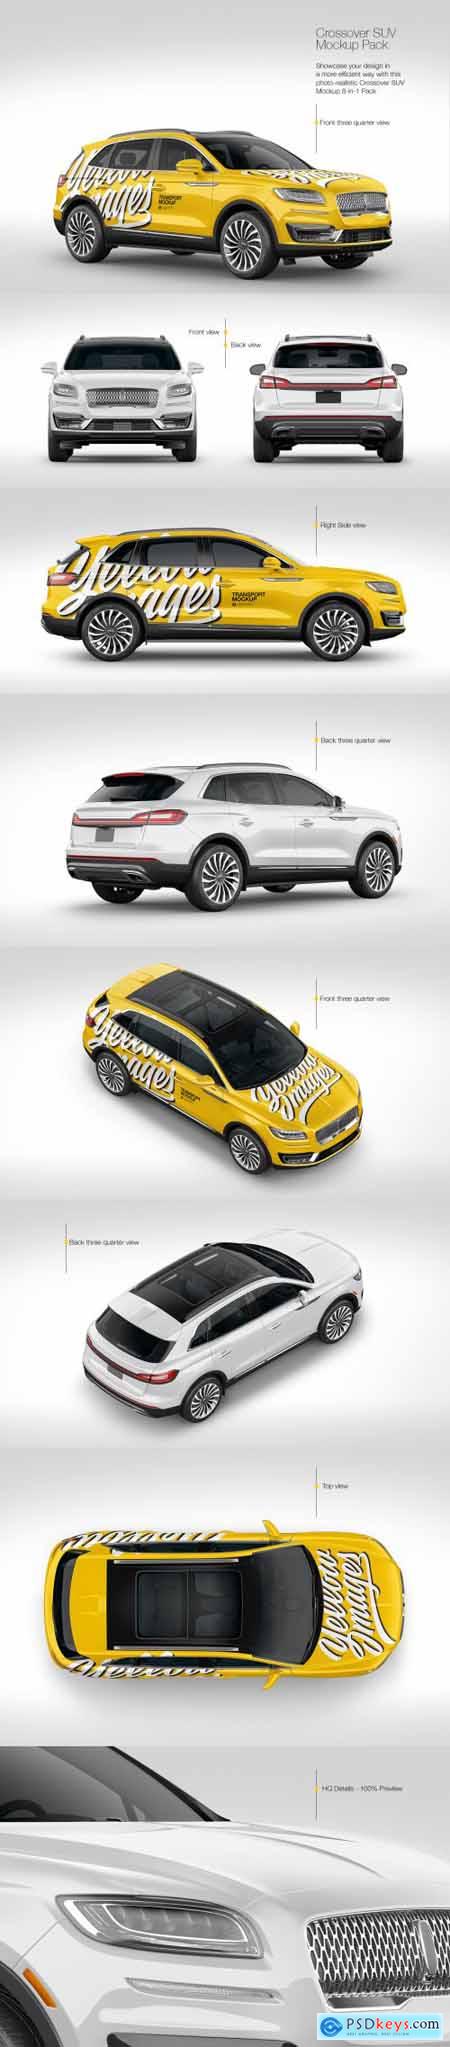 Download Crossover Suv Mockup Pack 68091 Free Download Photoshop Vector Stock Image Via Torrent Zippyshare From Psdkeys Com